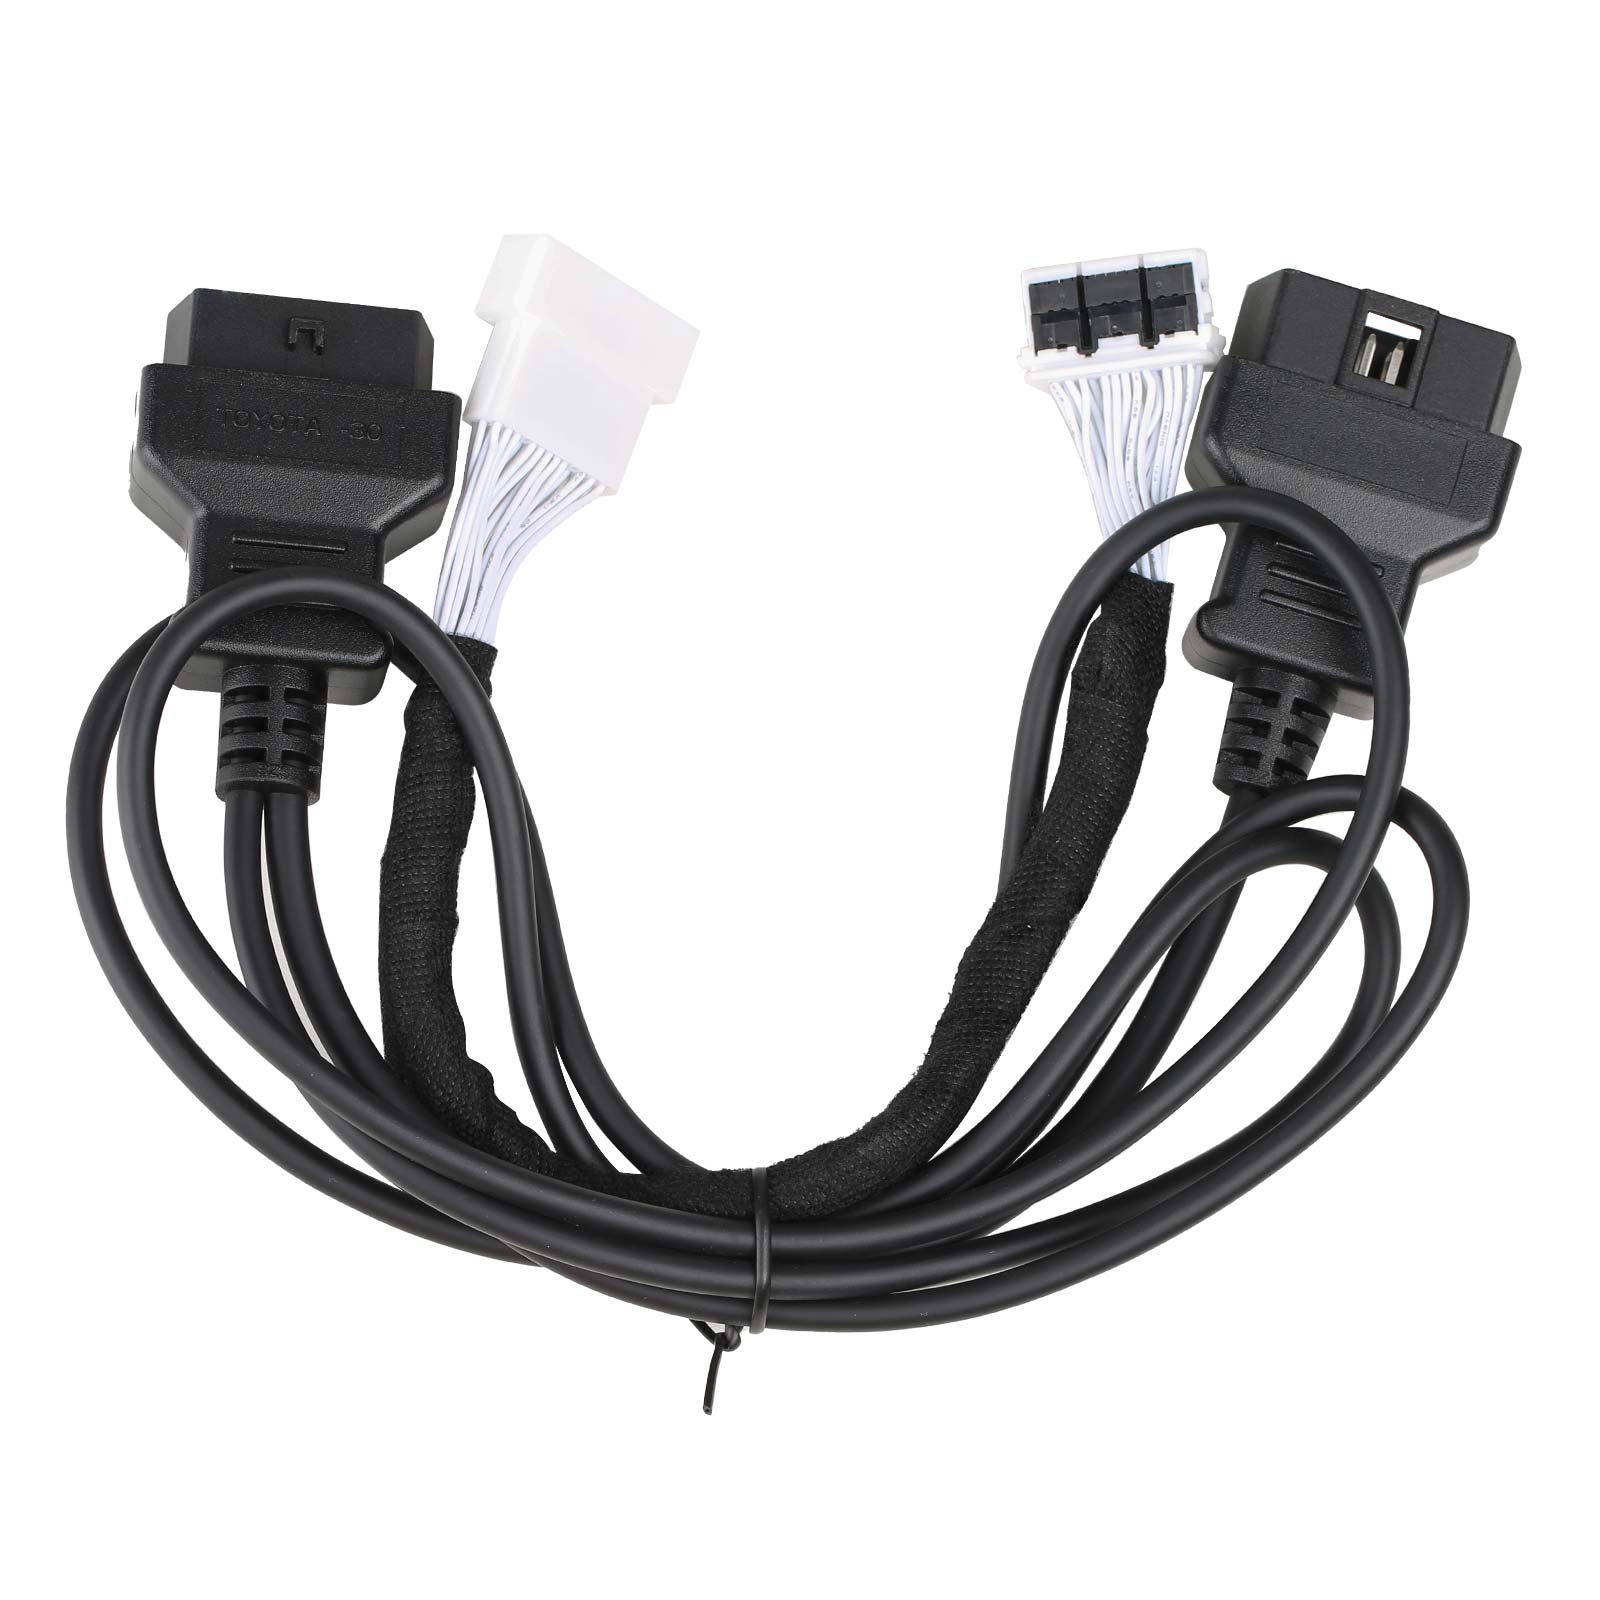 2023 OBDSTAR Toyota-30 Cable Proximity Key Programming All Key Lost Support 4A and 8A-BA No Need to Pierce the Harness for X300DP Plus/ X300 Pro4